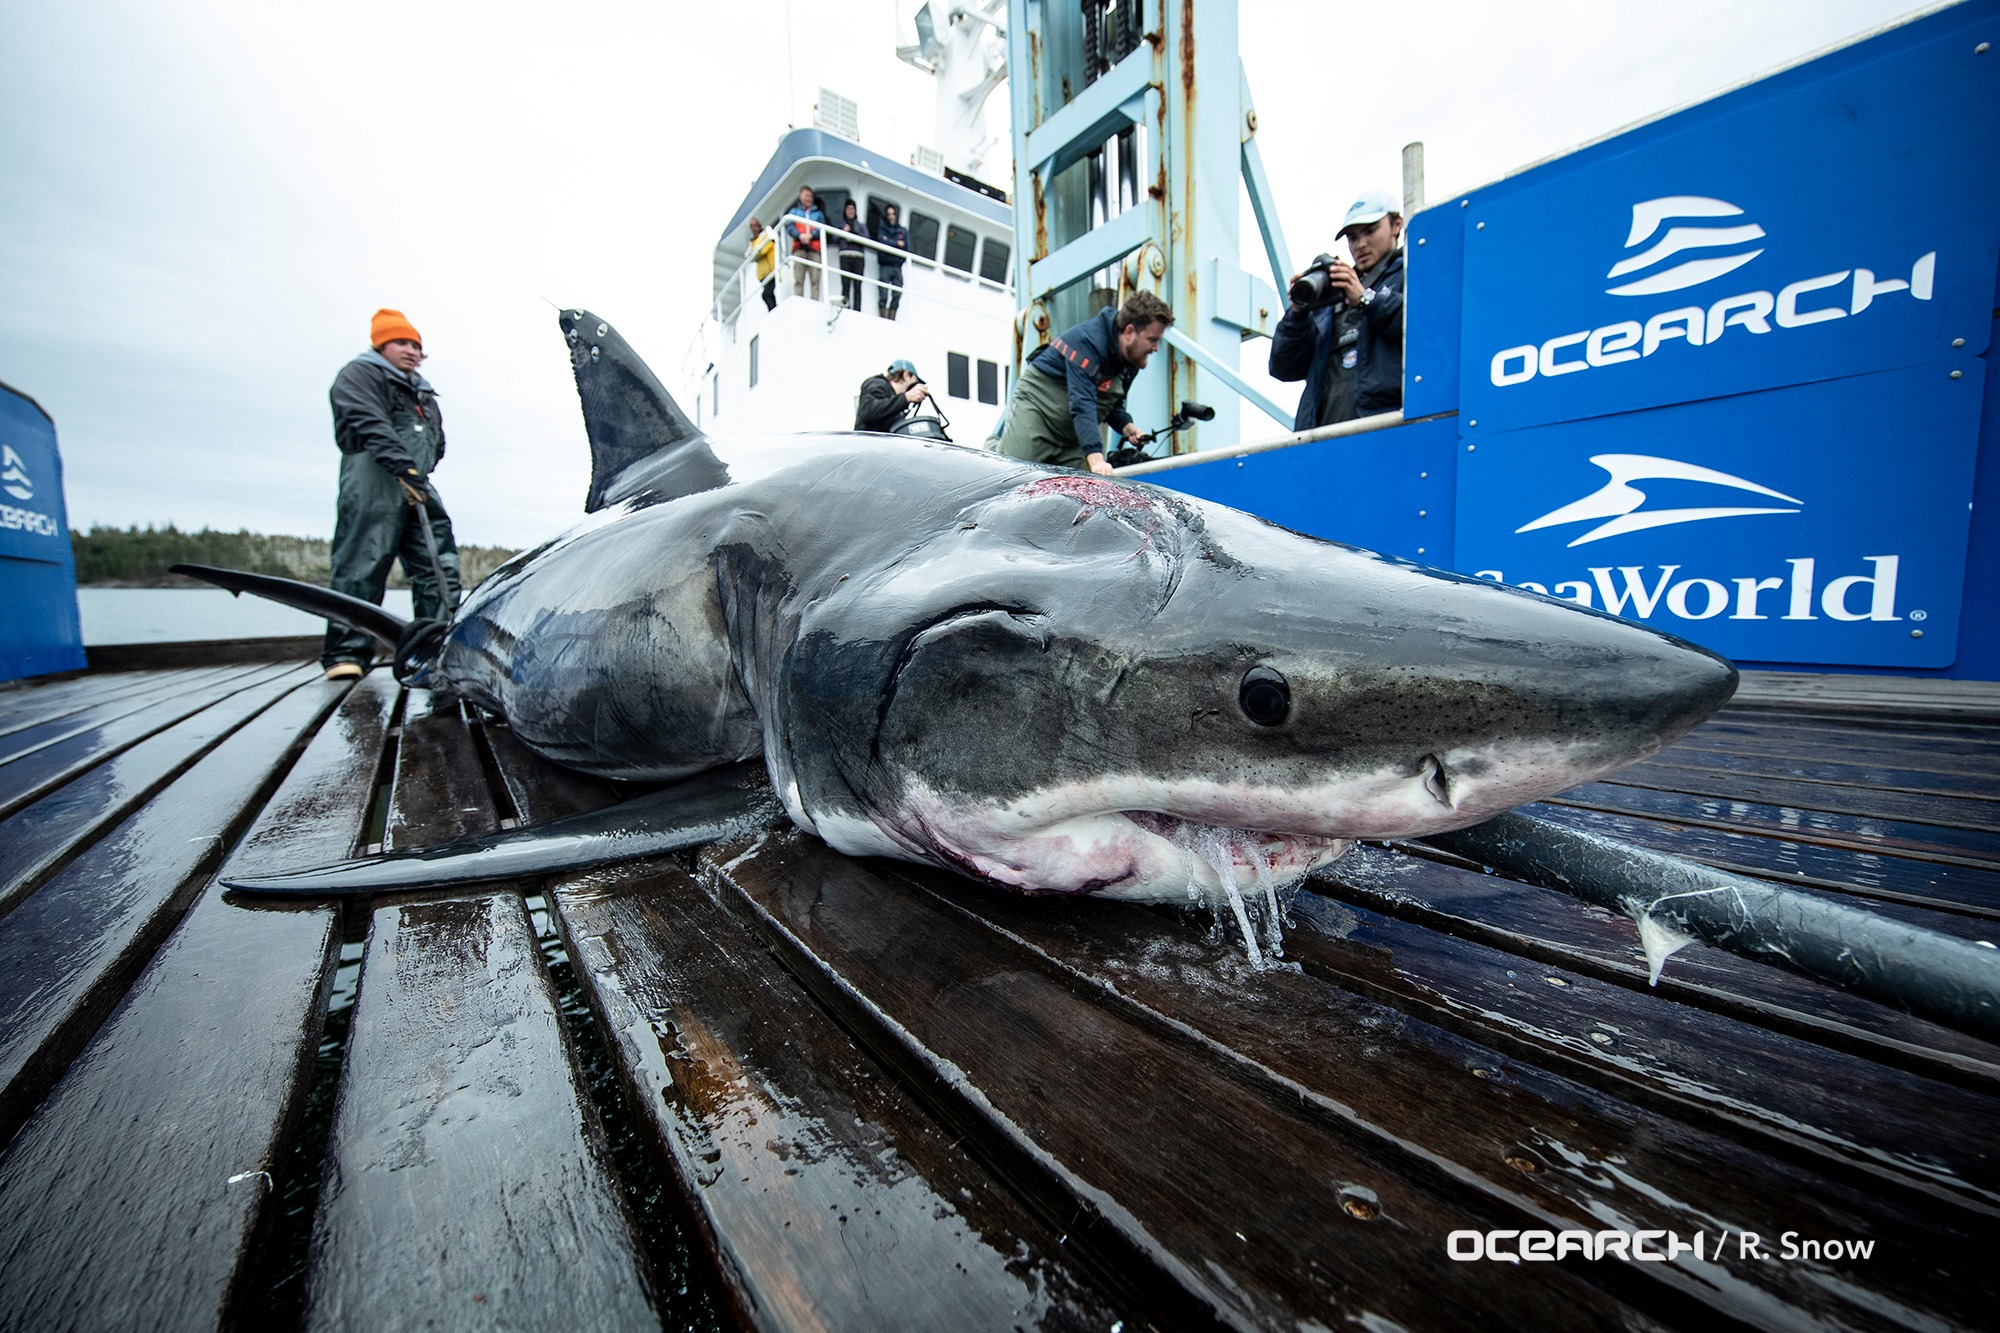 A colossal giant from the deep ocean bites enormous great white shark ...